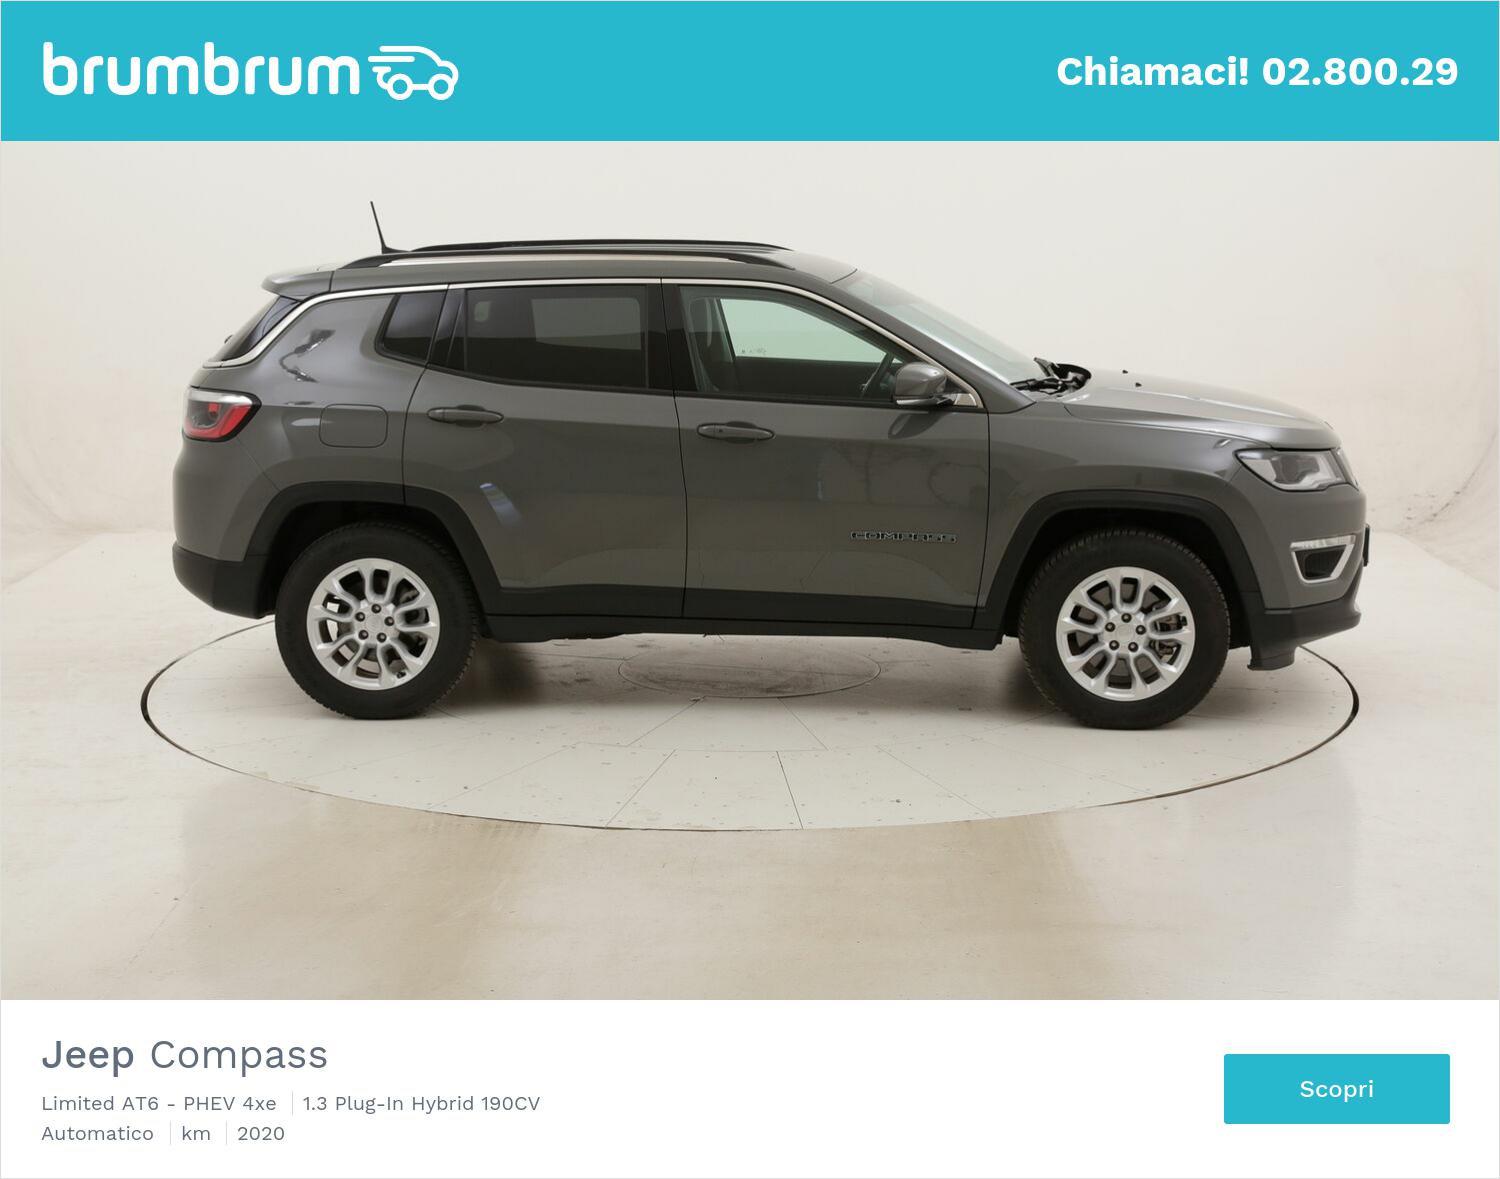 Jeep Compass Limited AT6 - PHEV 4xe usata del 2020 con 8.413 km | brumbrum